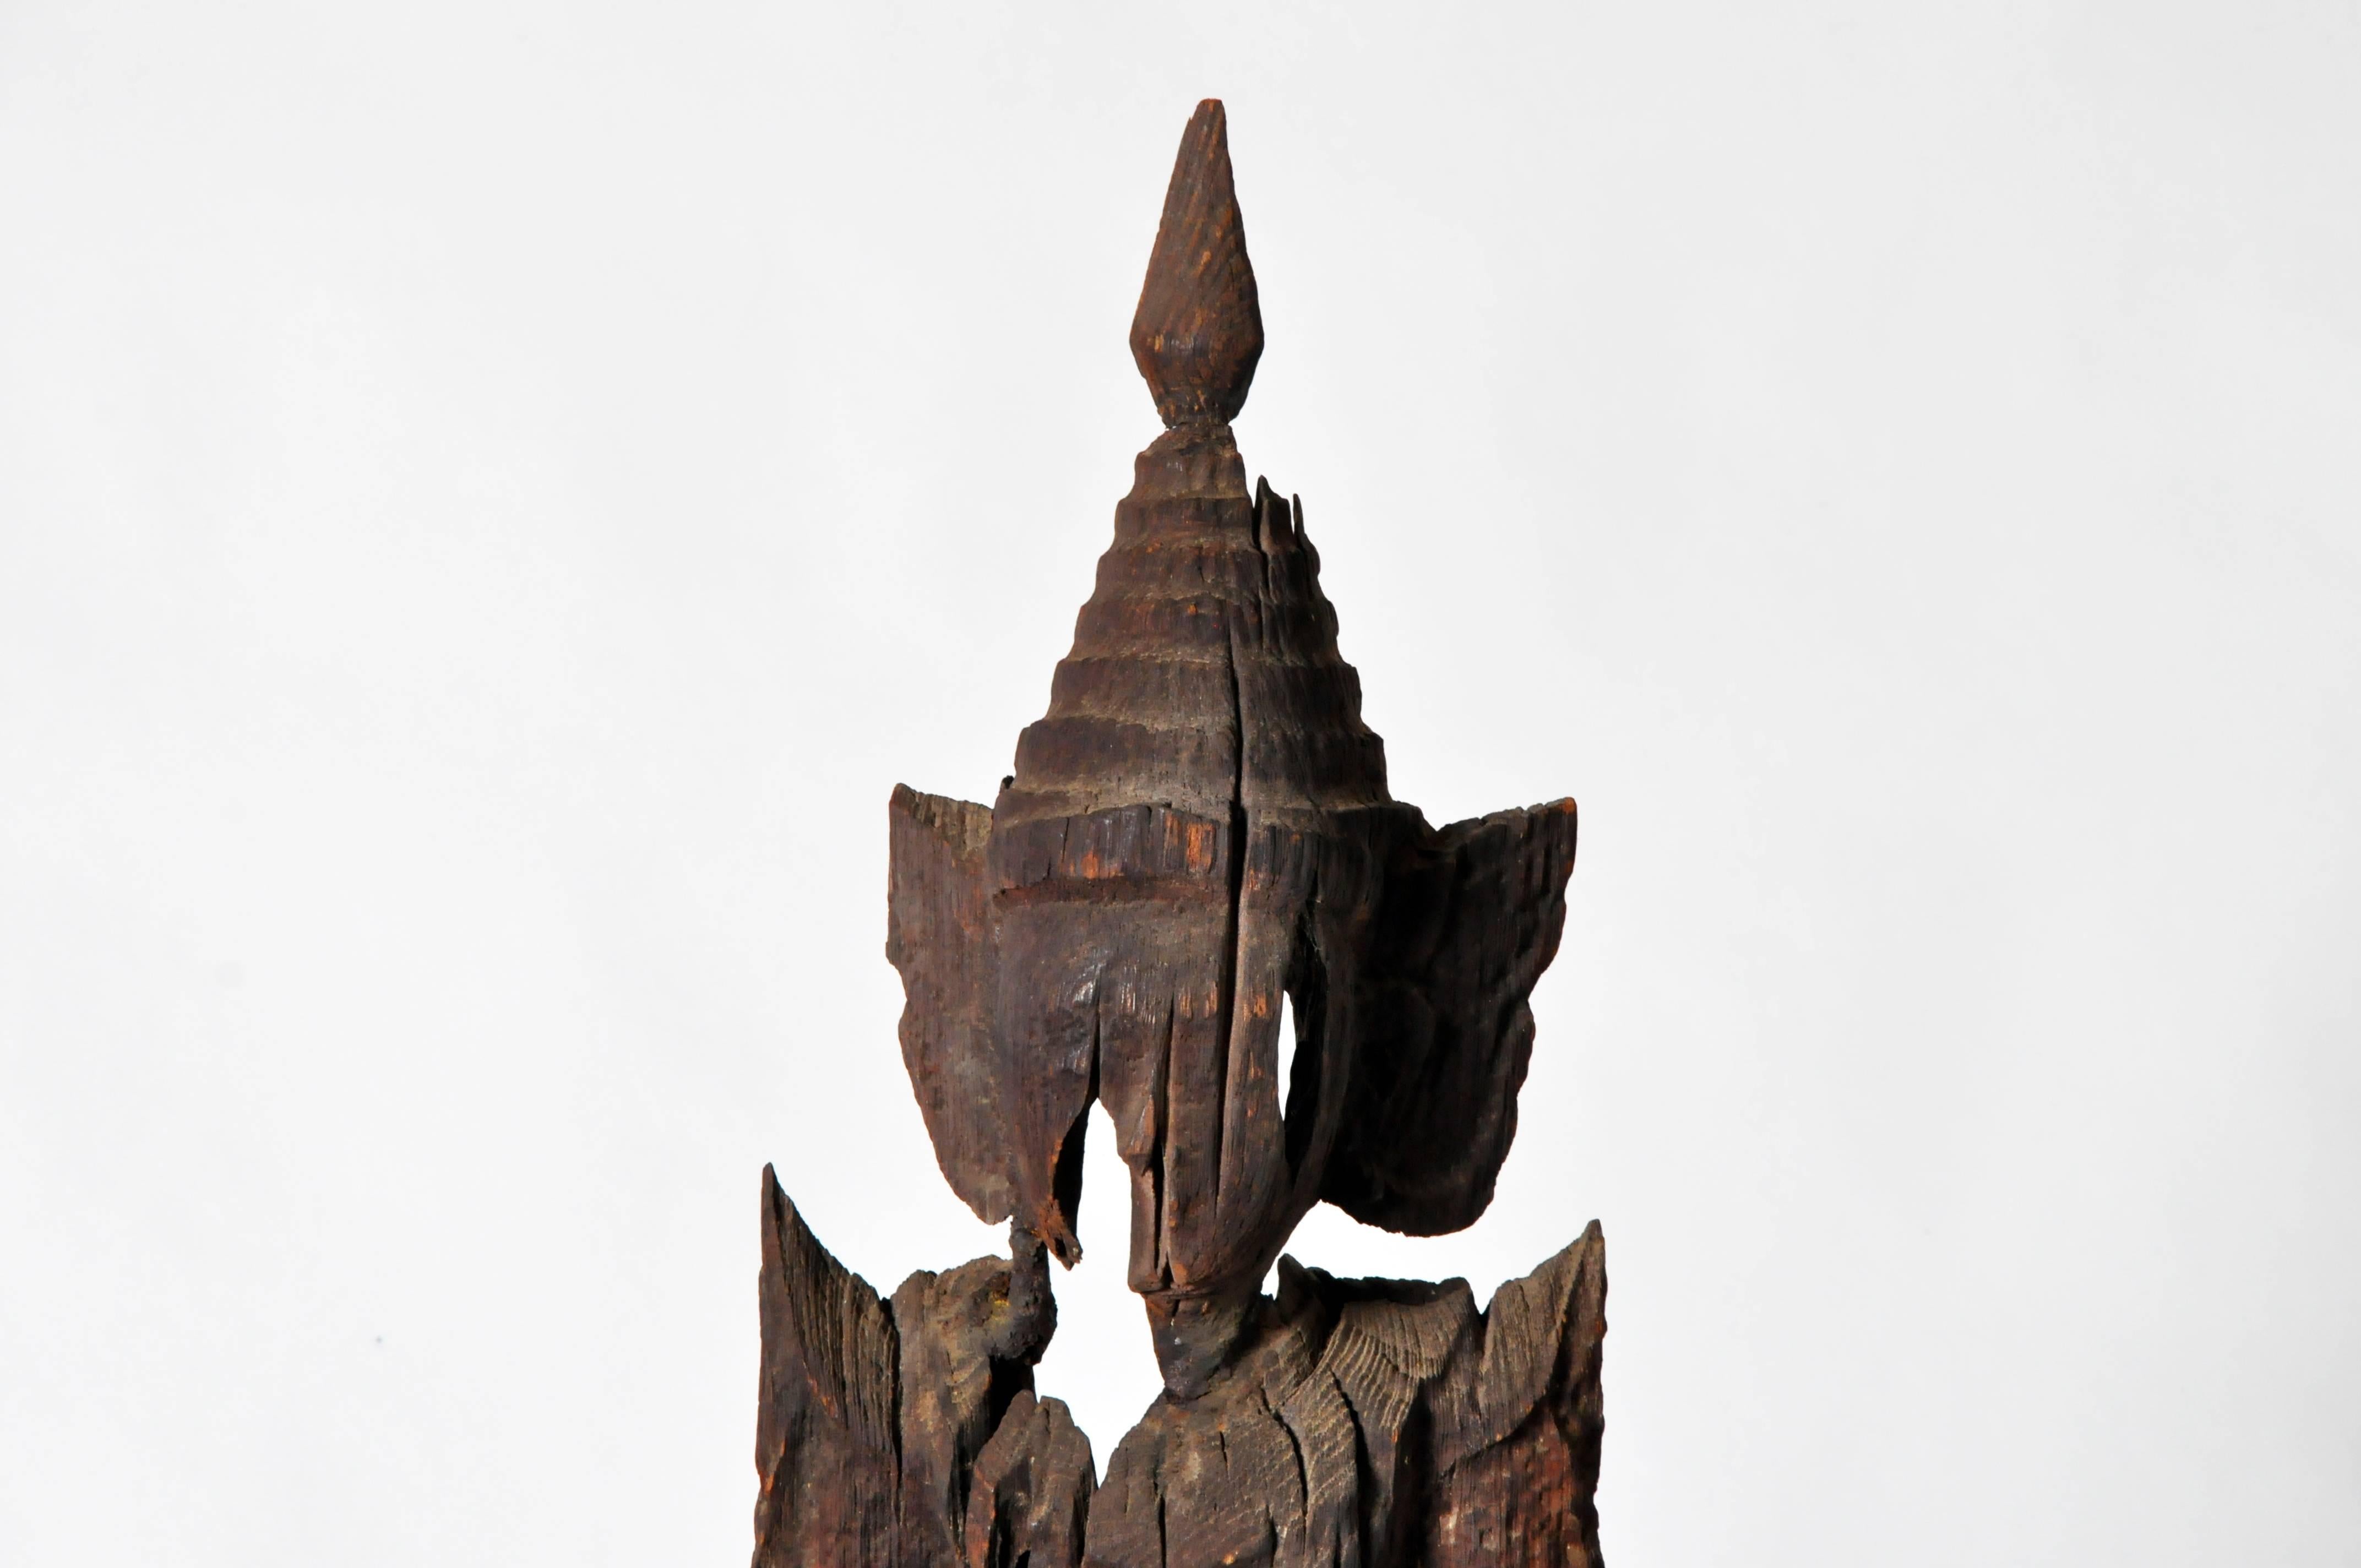 This beautiful greeting angel is from Thailand and is made from teakwood. This type of angel holds its hands clasped together in a respectful wai and wears a heavenly costume decorated with pointed winglets and a draped skirt. According to Therevada